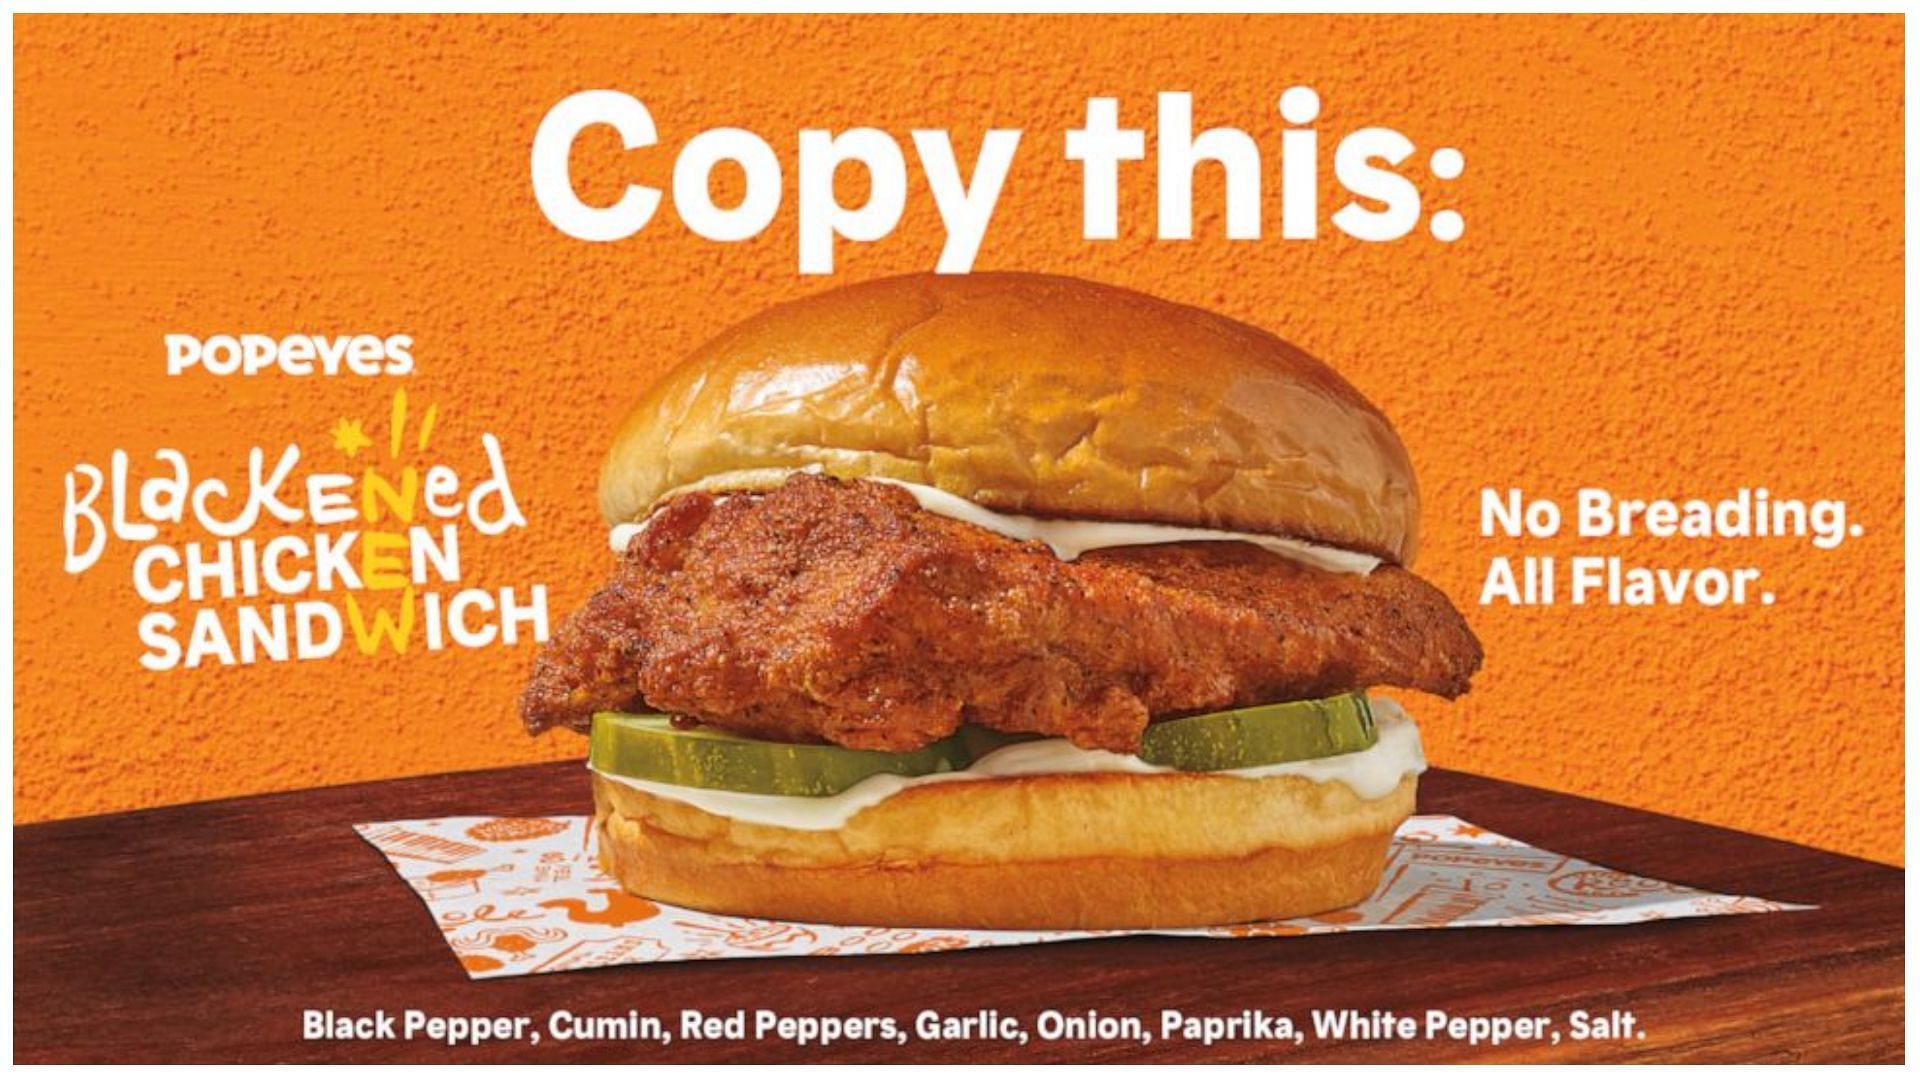 Blackened Fried Chicken Sandwich and the spice mix used to coat it (Image via Popeyes)